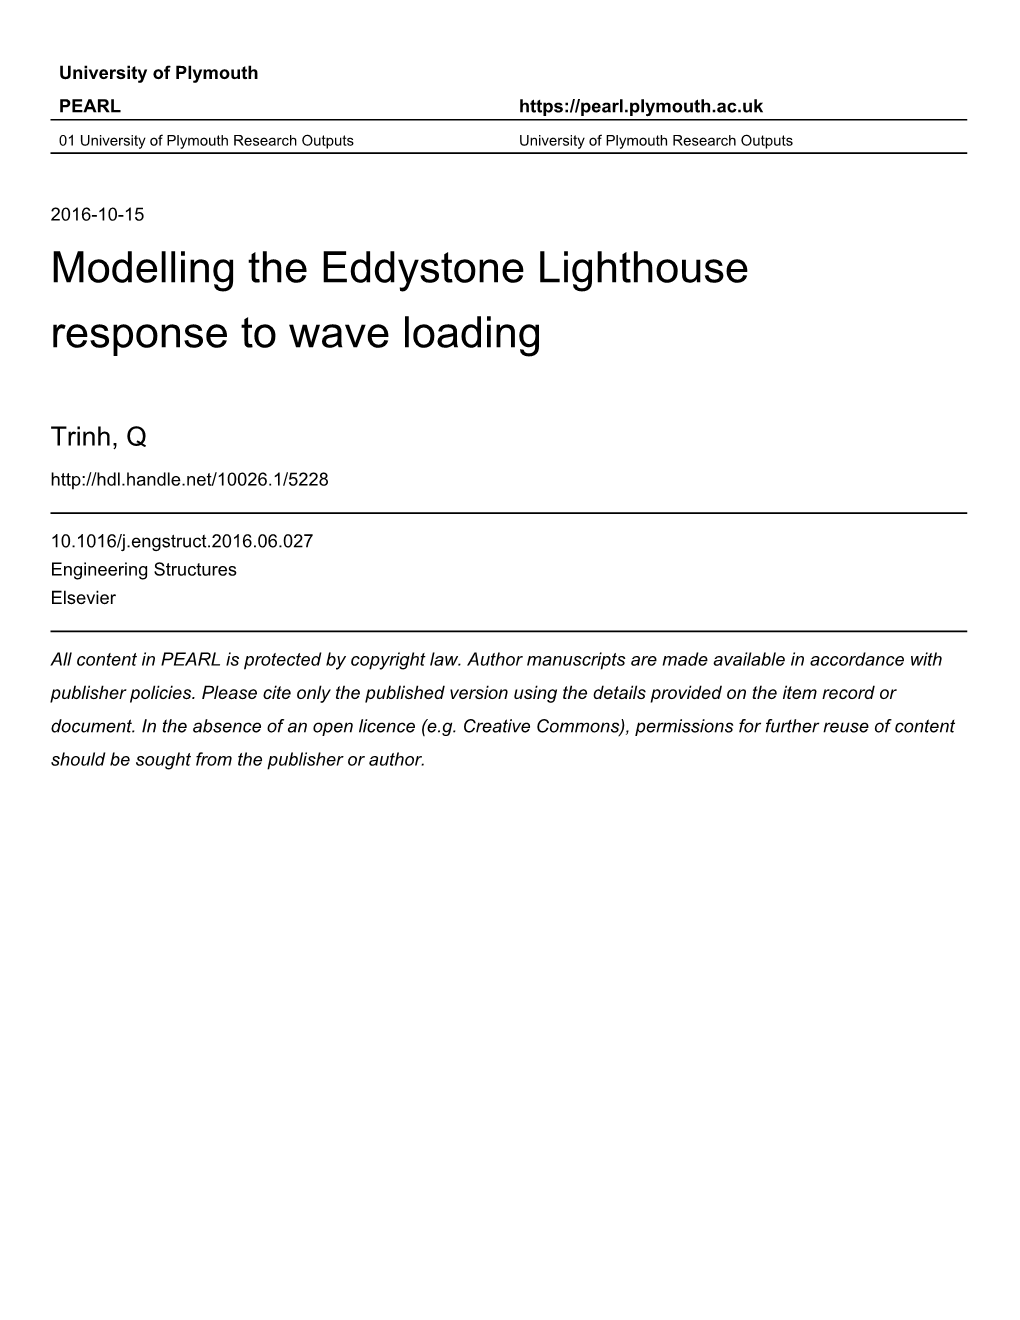 Modelling the Eddystone Lighthouse Response to Wave Loading